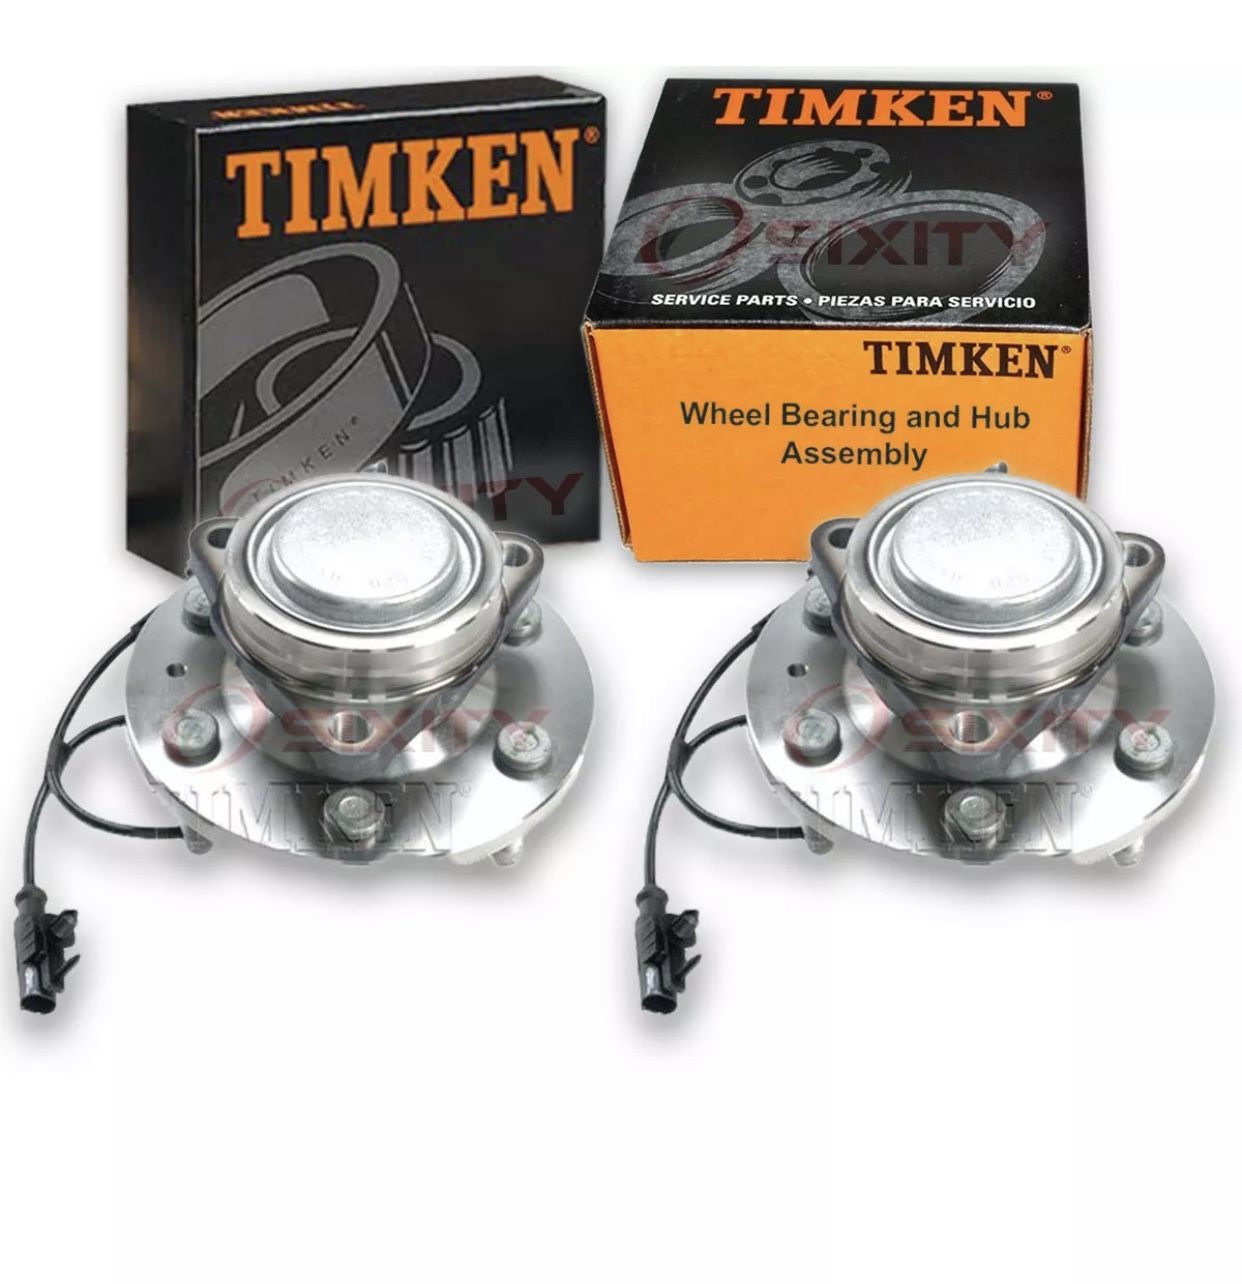 Timeken front pair wheel bearing and hub assembly for 2007-2014 Cadillac Escalade